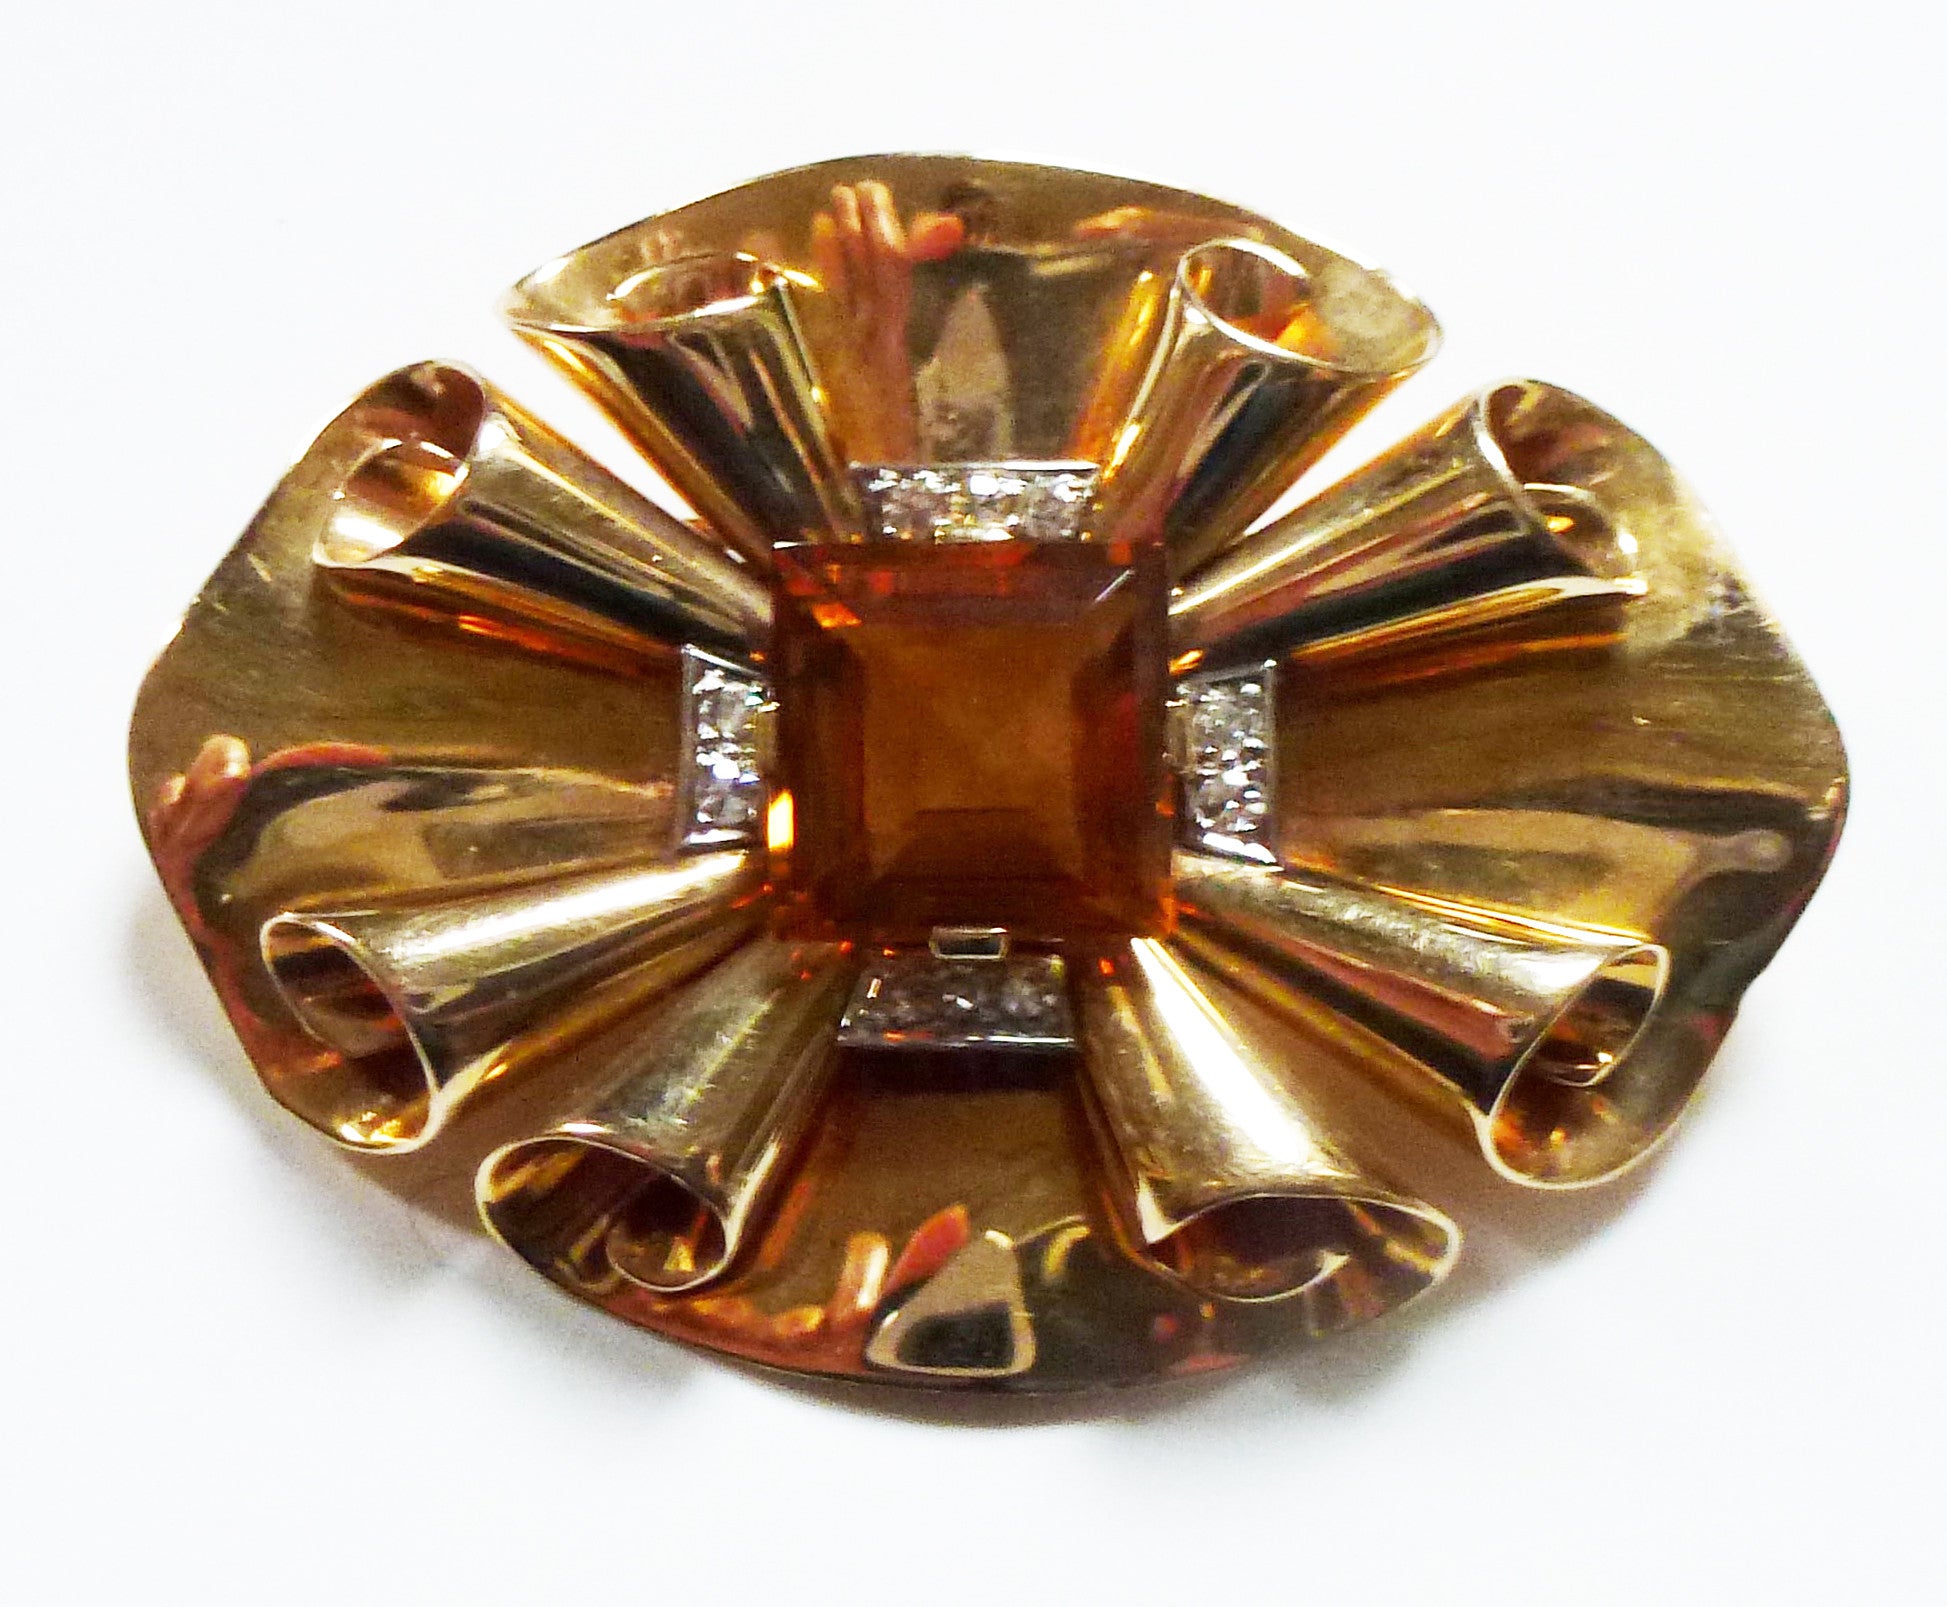 SOLD American Bailey, Banks & Biddle Citrine and Diamond Brooch